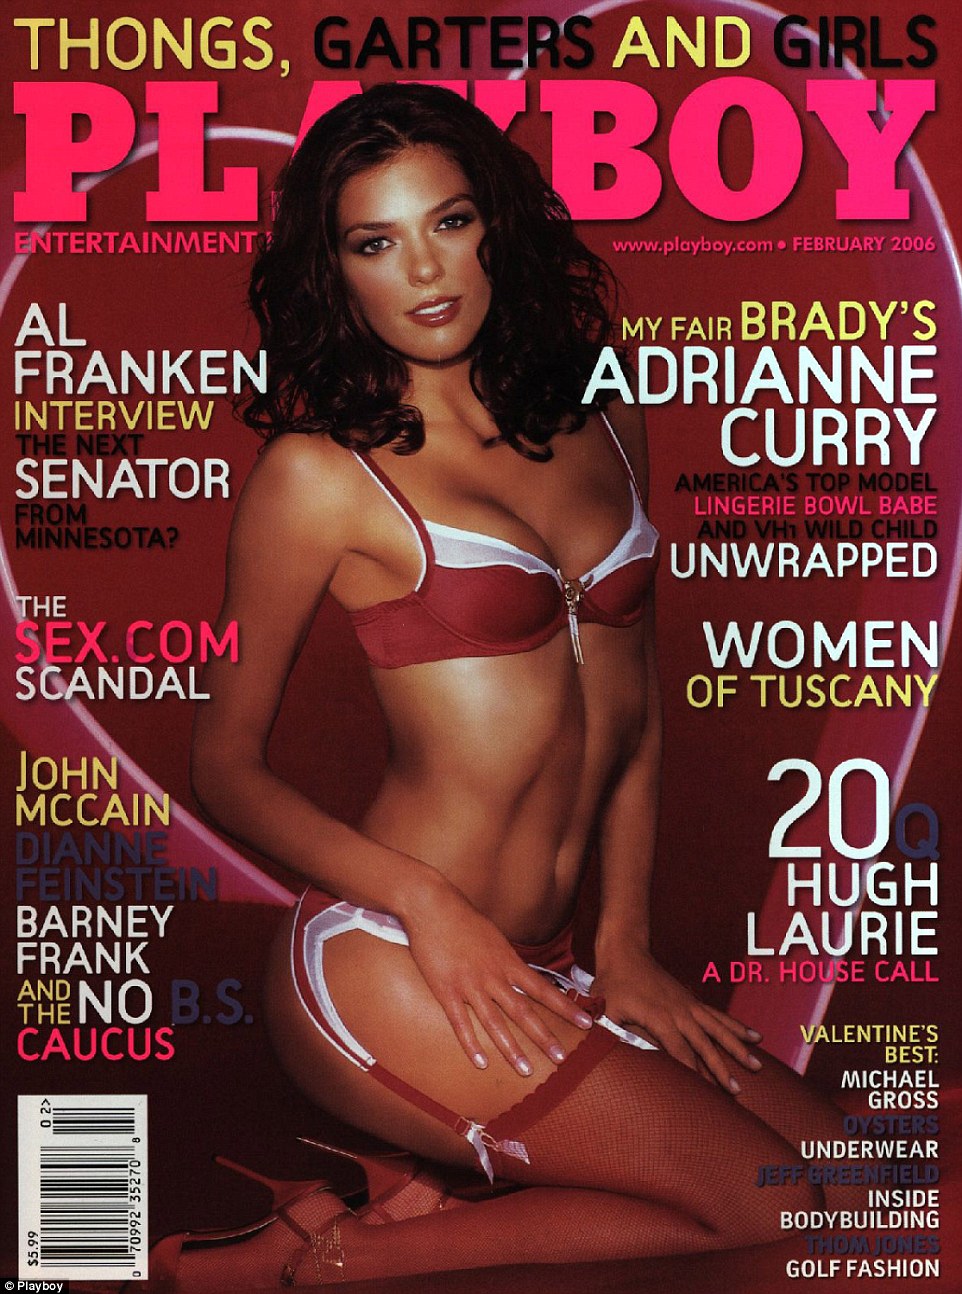 courtney w recommends adrienne curry playboy pic